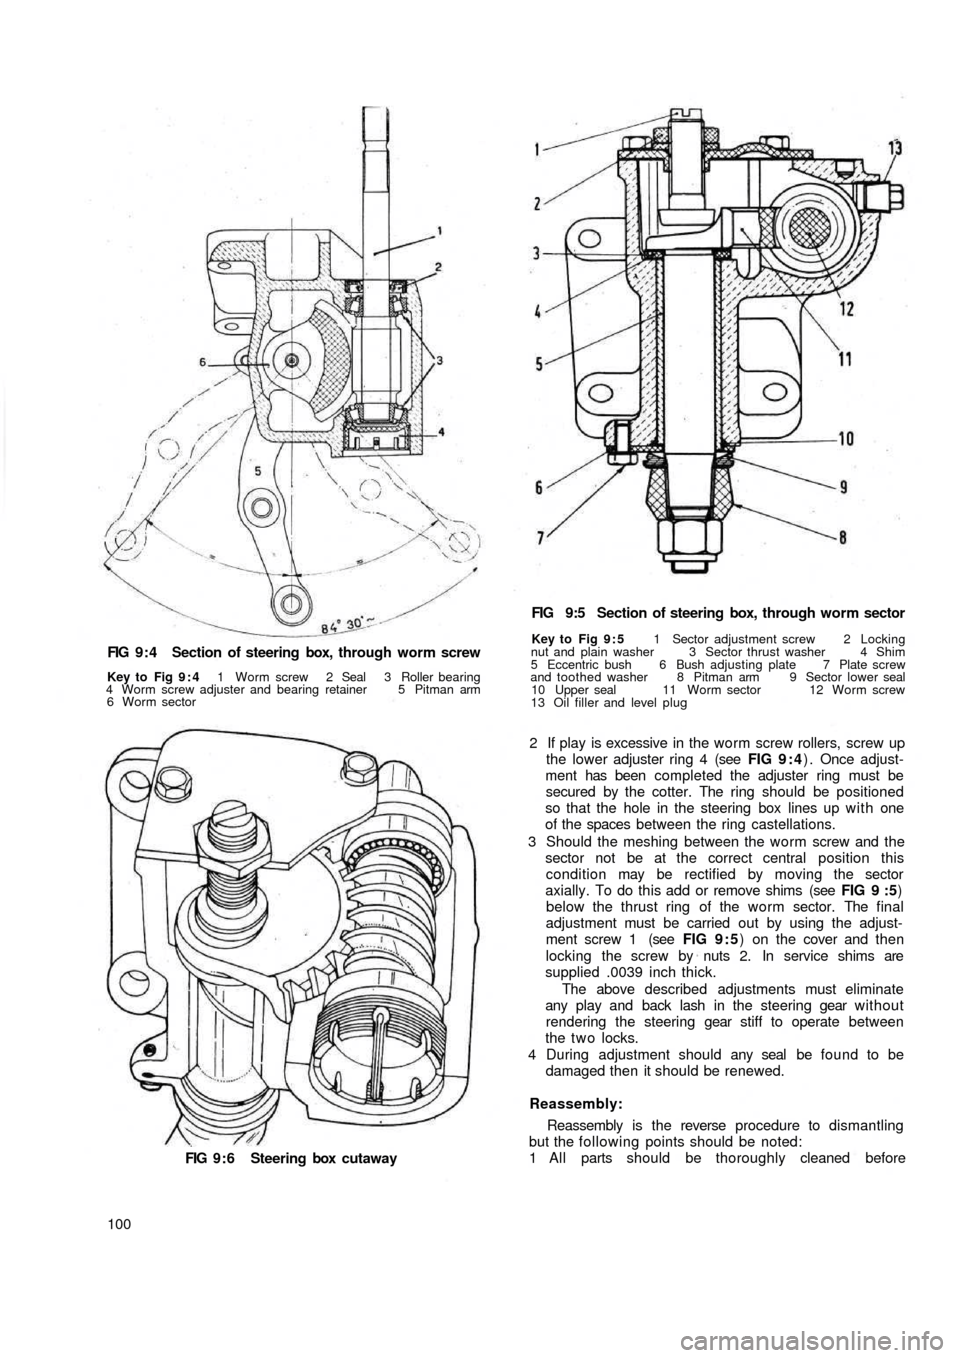 FIAT 500 1971 1.G Workshop Manual FIG 9 : 4  Section of steering box,  through worm screw
Key to  Fig 9 : 4 1 Worm screw 2 Seal 3 Roller bearing
4 Worm screw adjuster and bearing retainer 5 Pitman arm
6 Worm sector
FIG 9 : 6  Steering